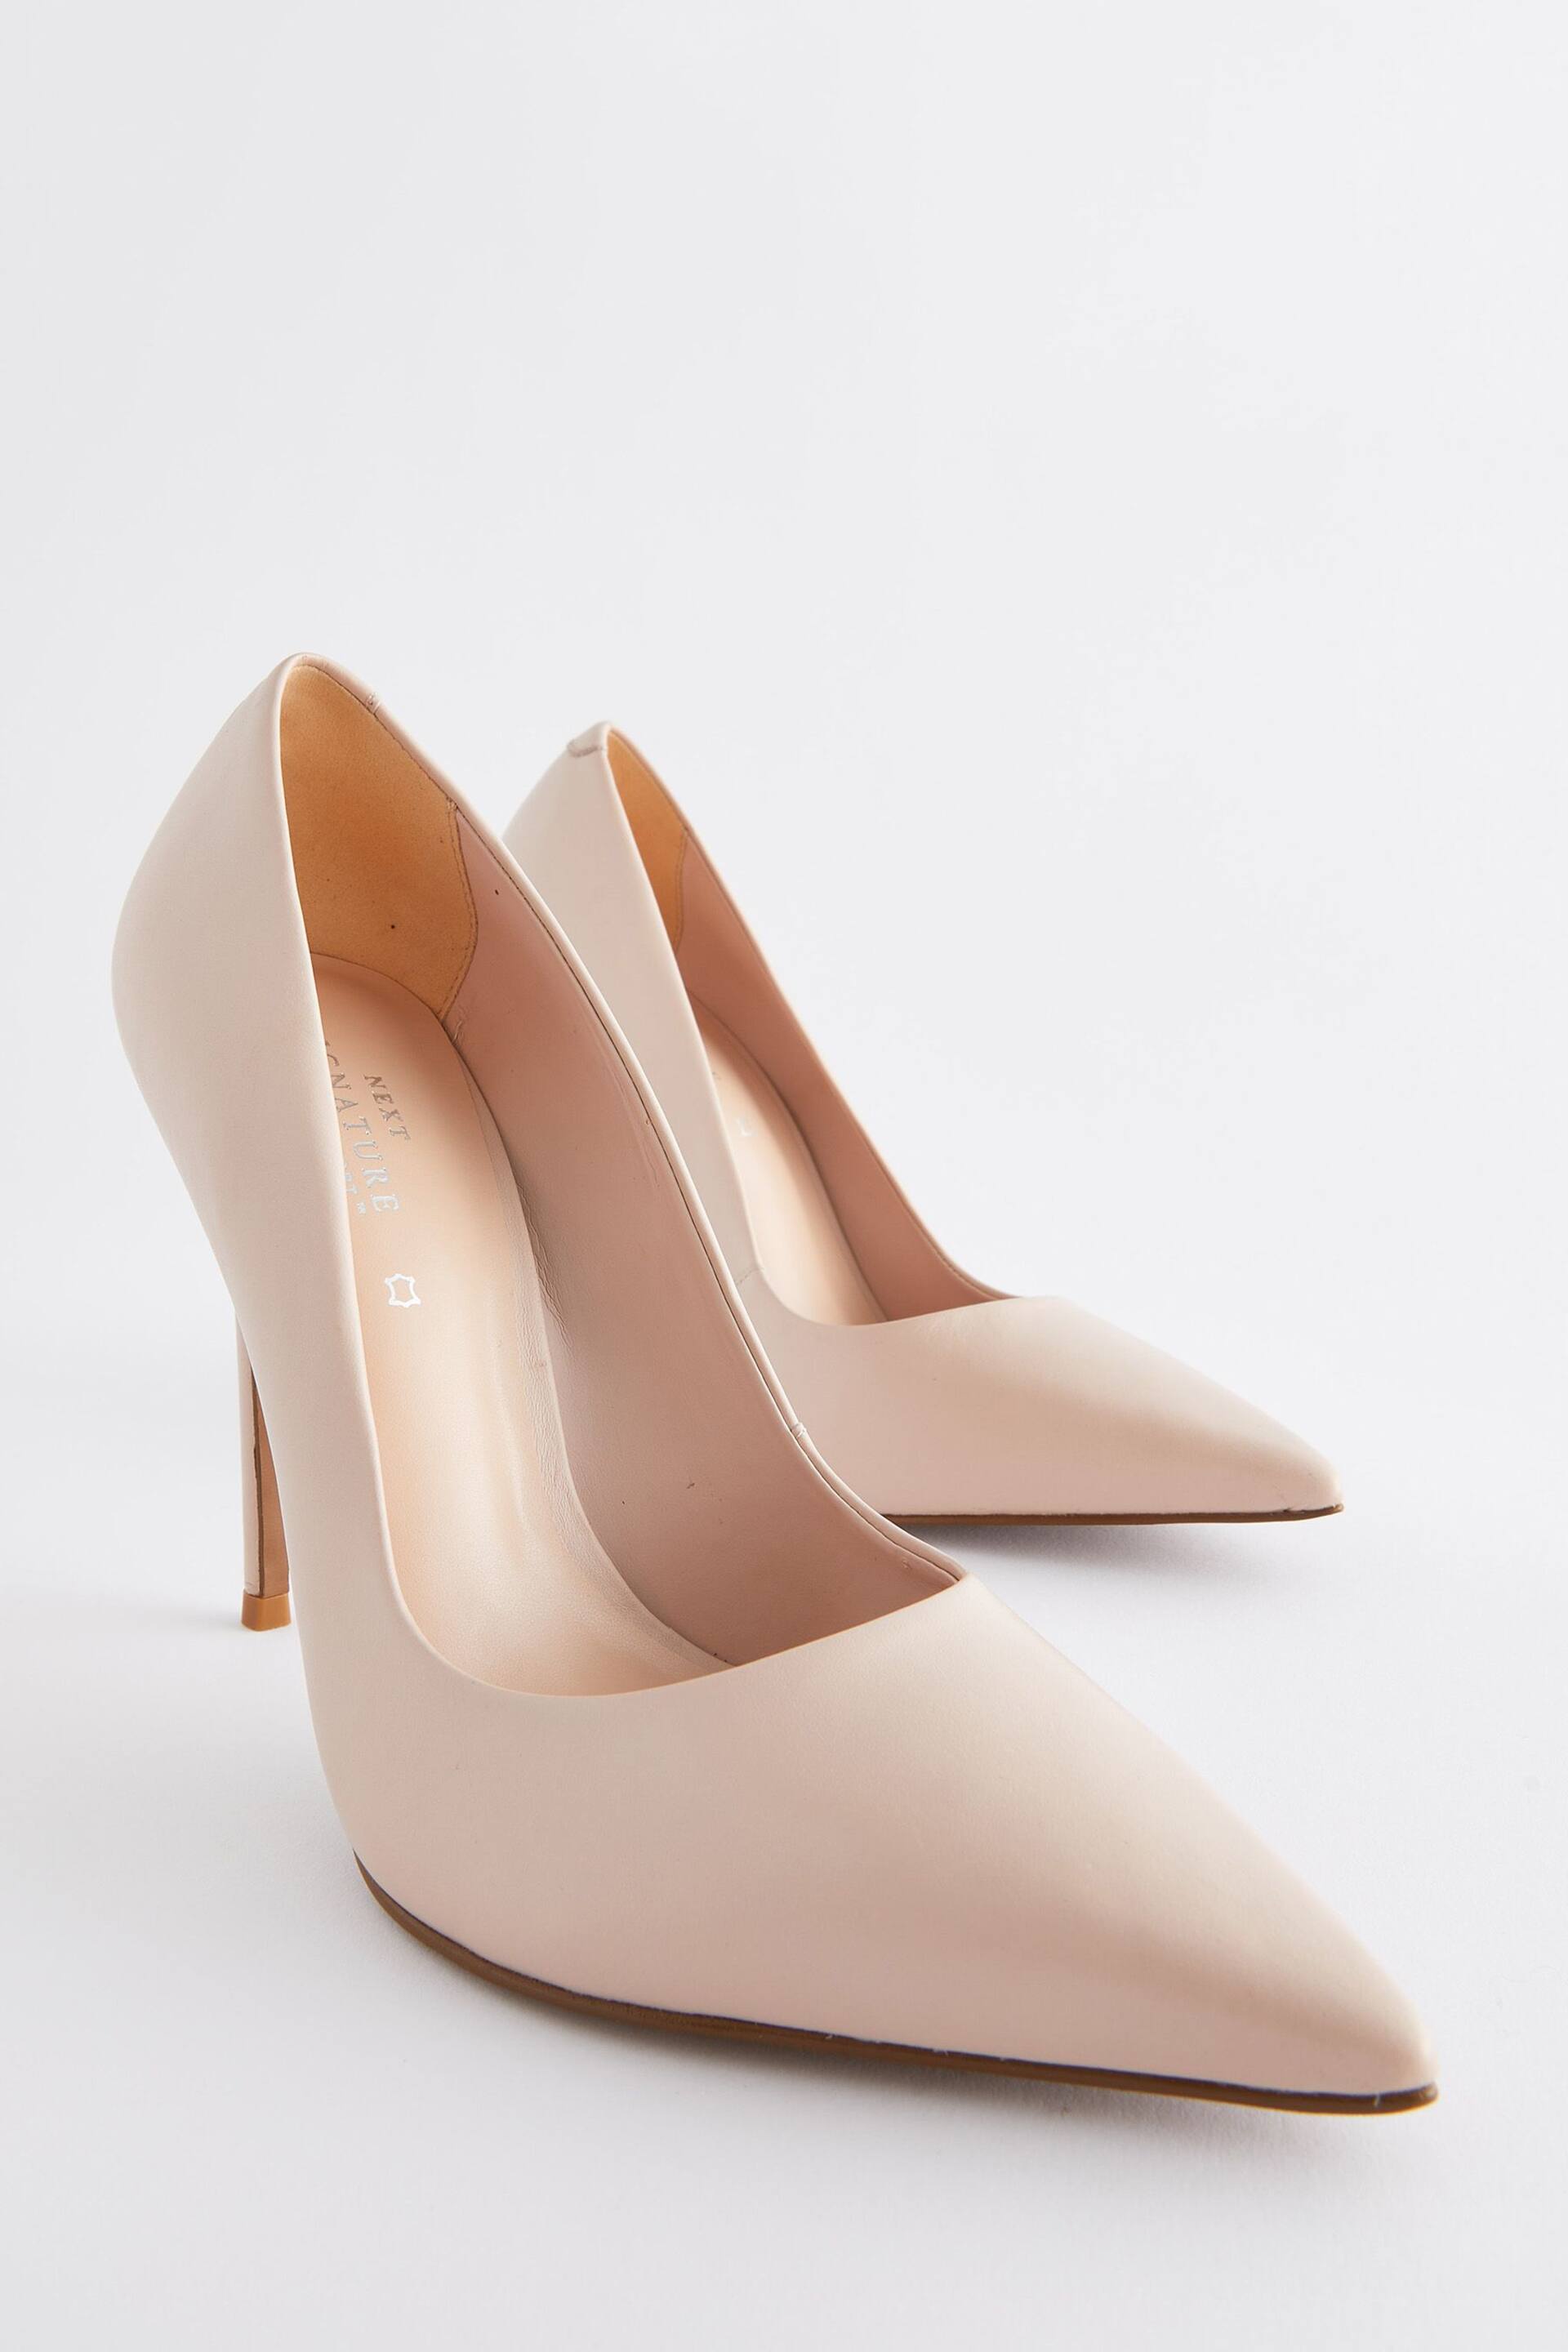 Nude Pink Signature Leather Court Shoes - Image 5 of 7